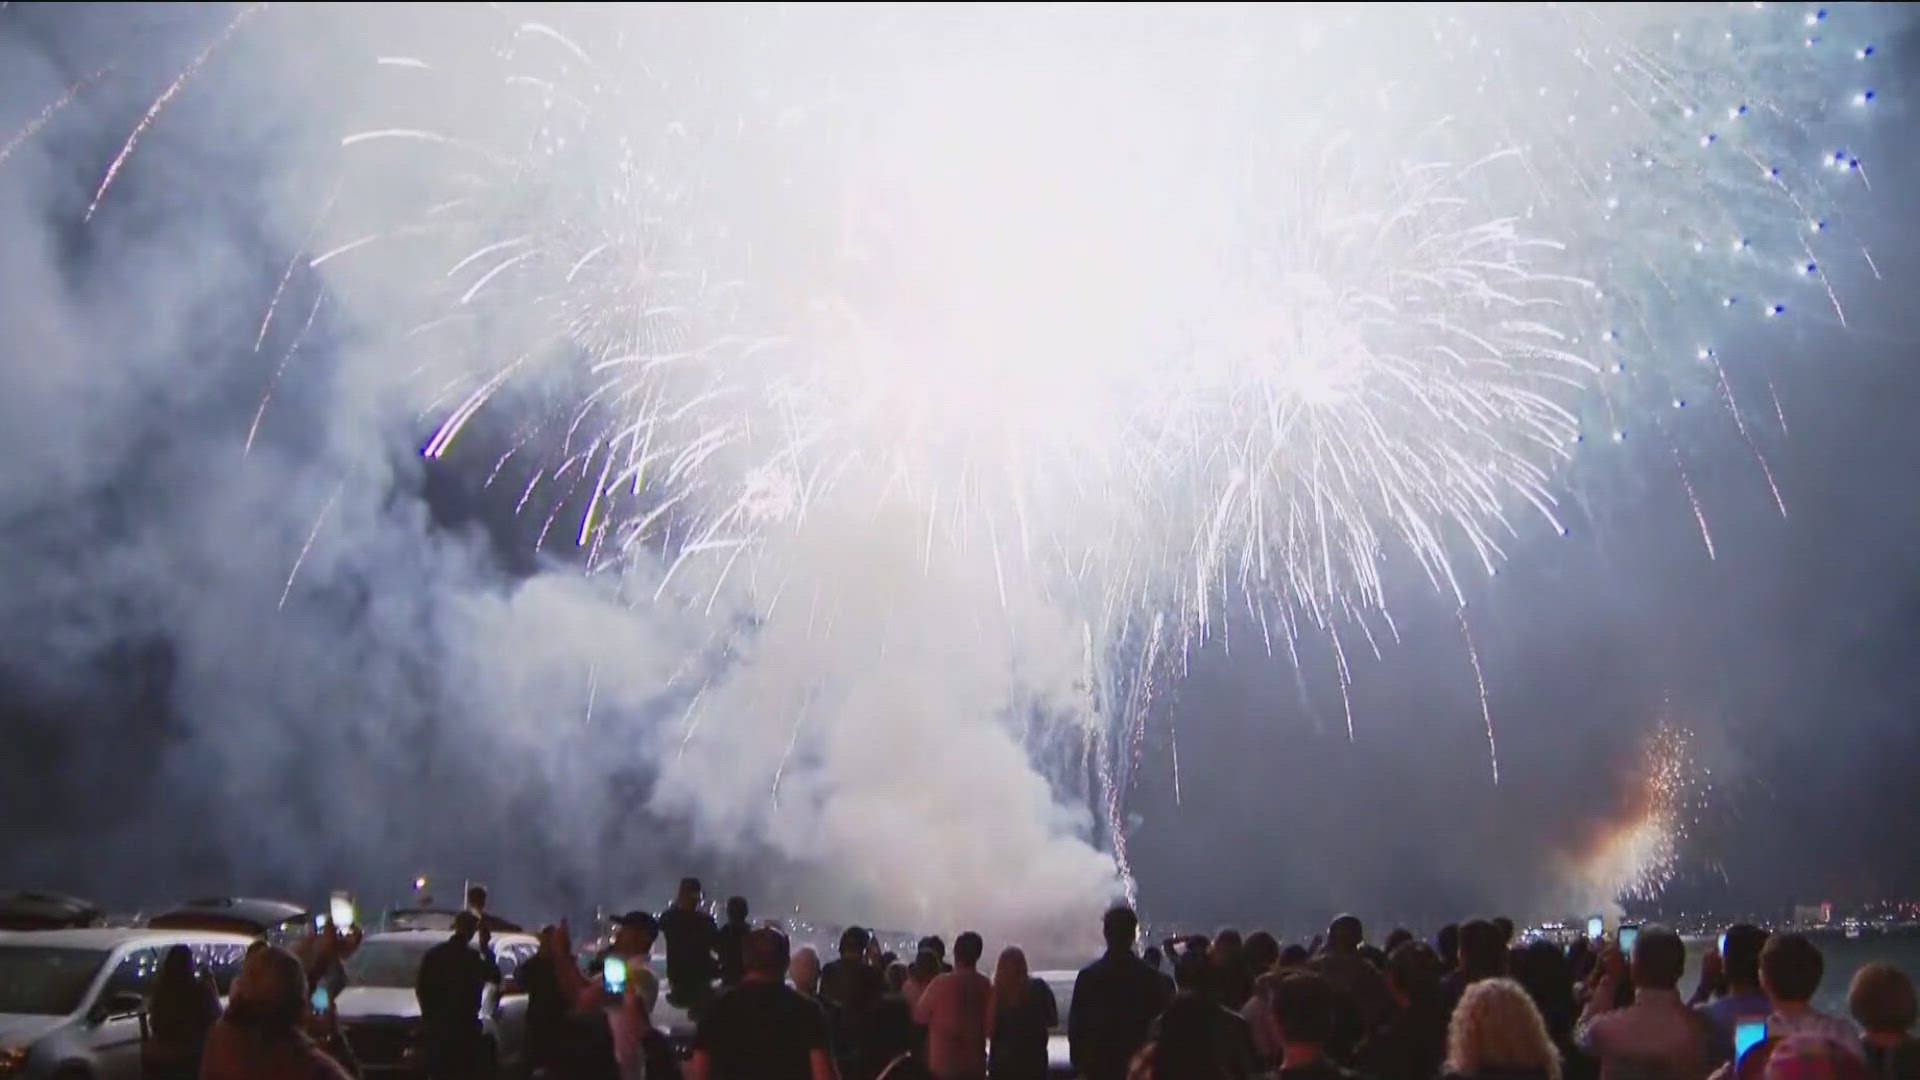 7,000 pounds of fireworks will be set off tomorrow night, according to organizers.